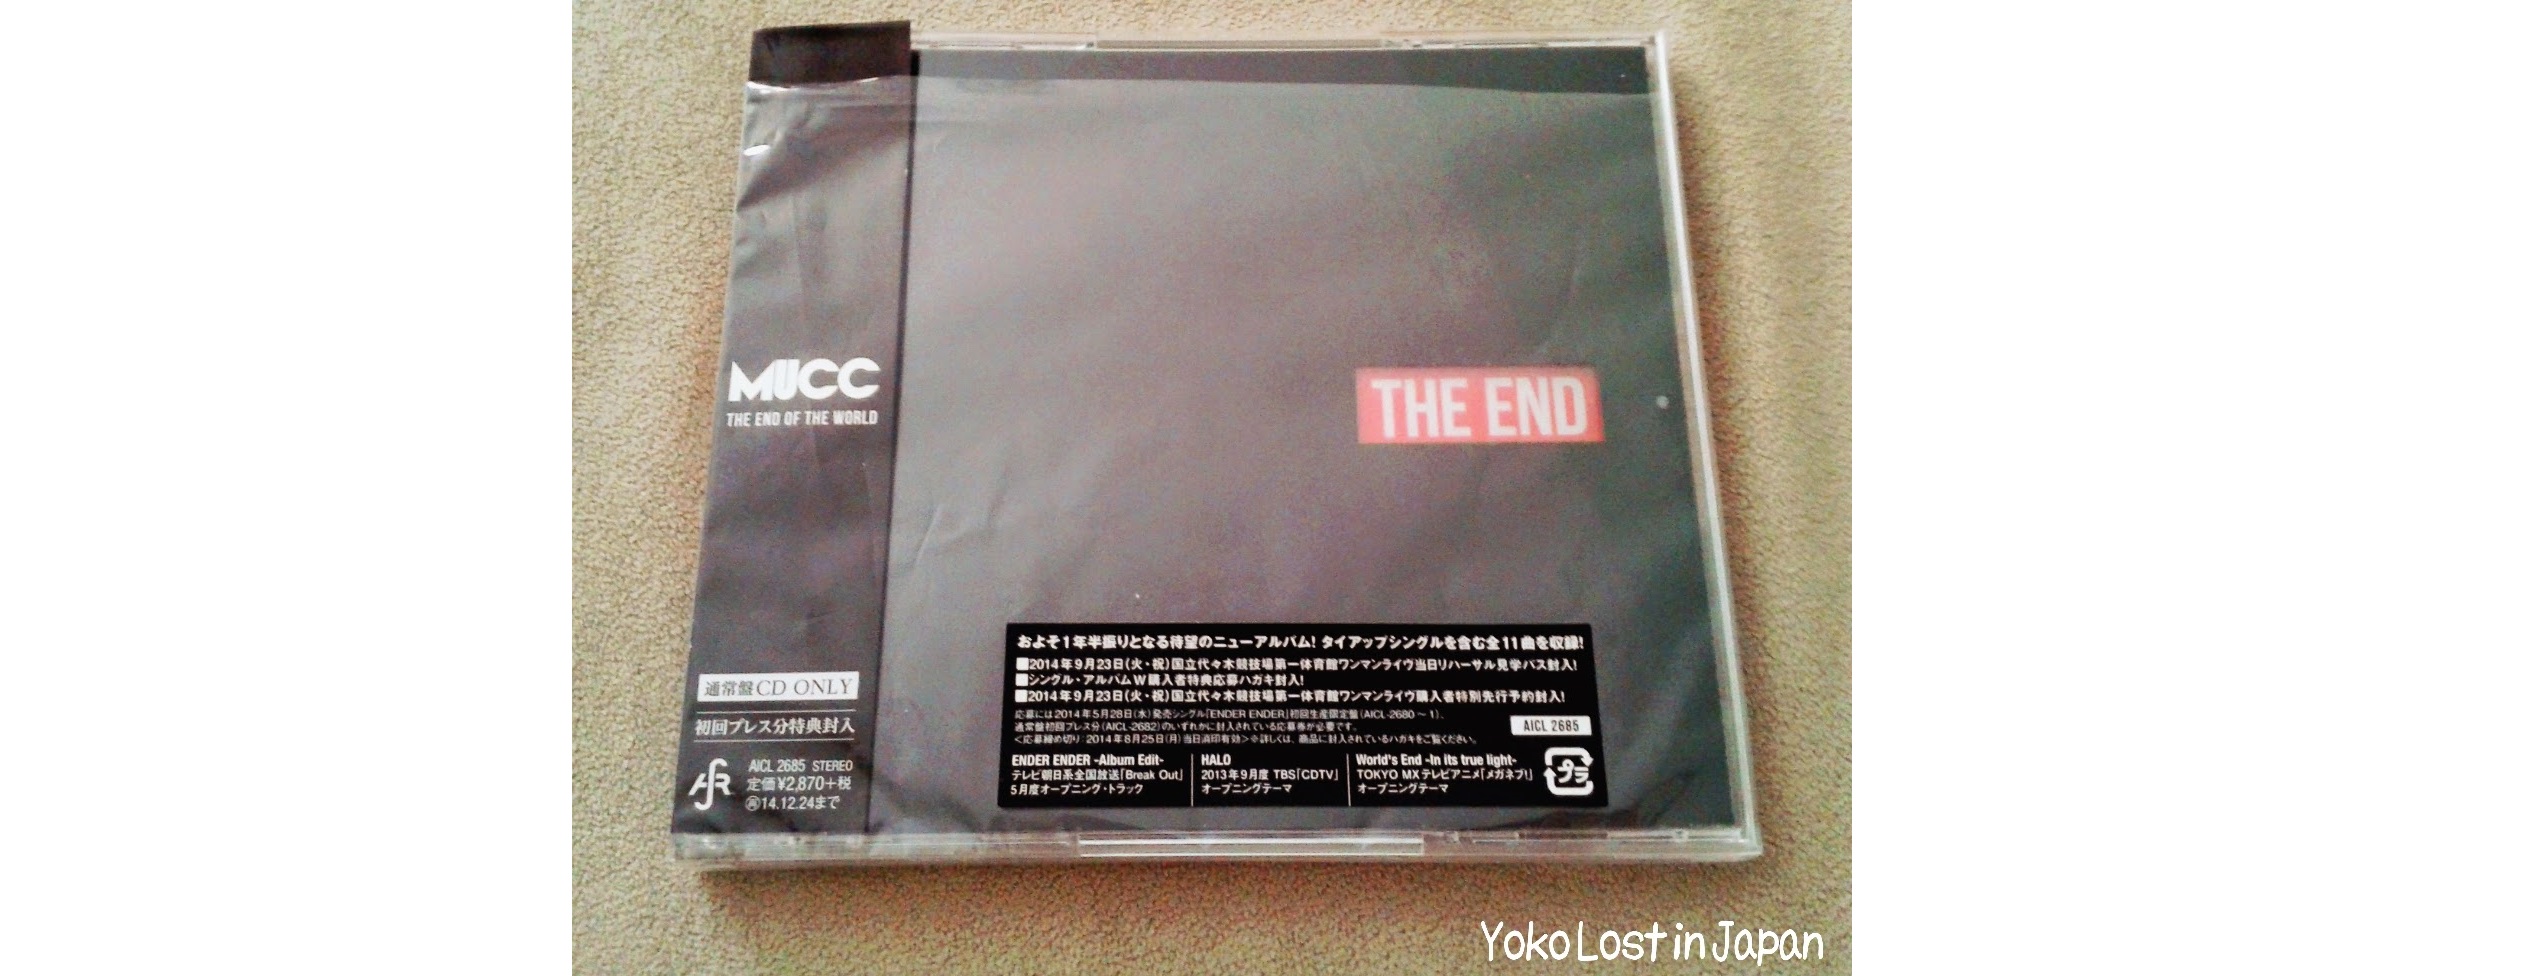 Mucc - The End of the World